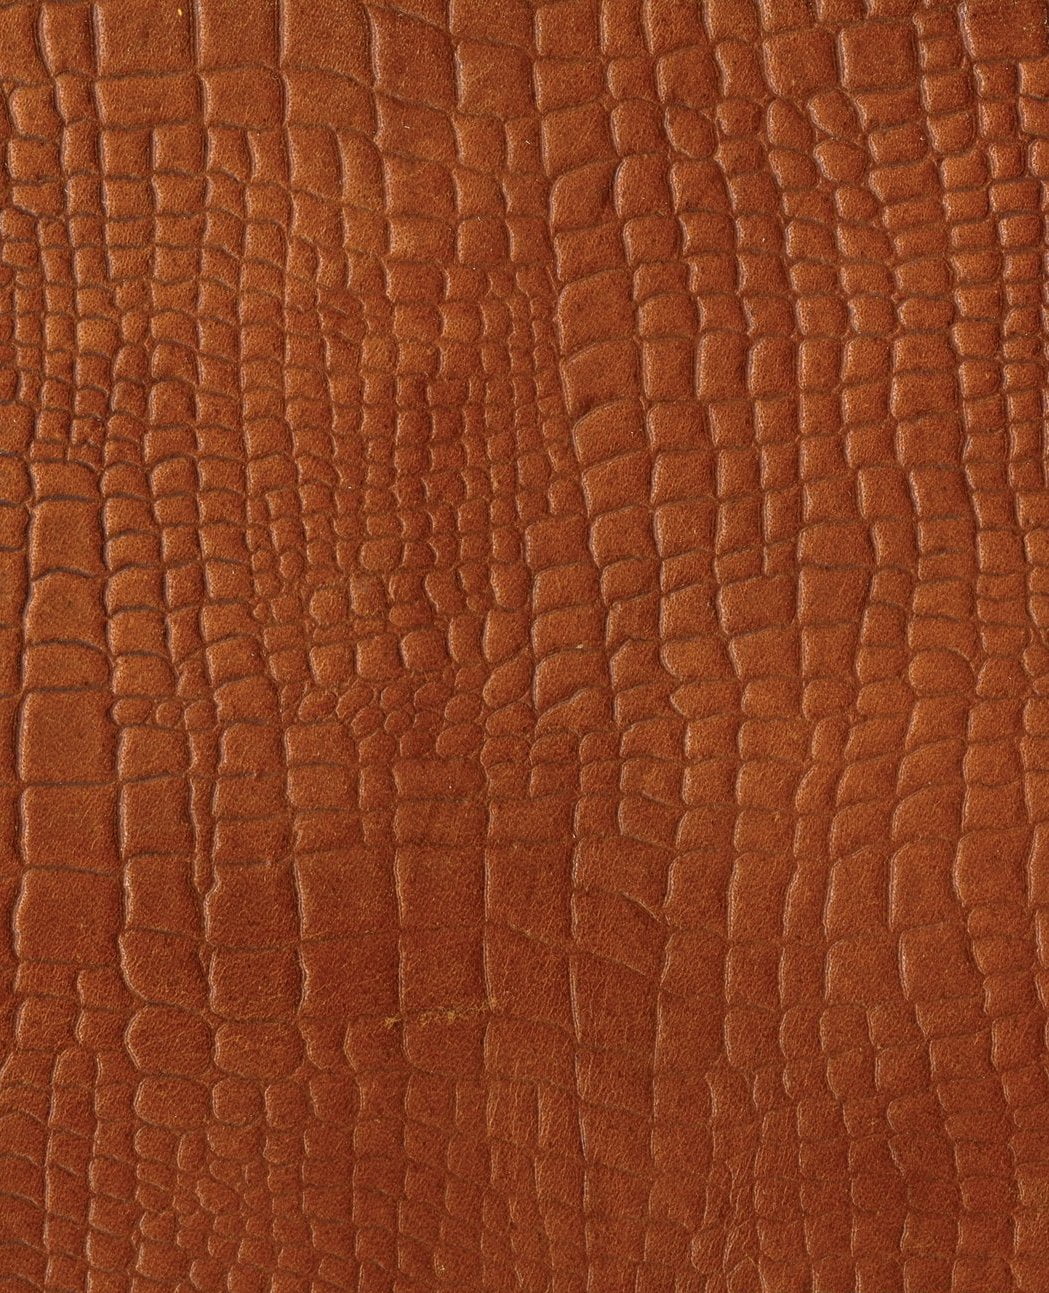 Leather Sheets for Leather Crafts - Full Grain Buffalo Leather Squares -  Great for Jewelry, Leather Wallets, Cricut, Leatherworking Arts and Crafts  Includes 3 Sheets (12x12)+ Leather Cord (36) Brown Squares